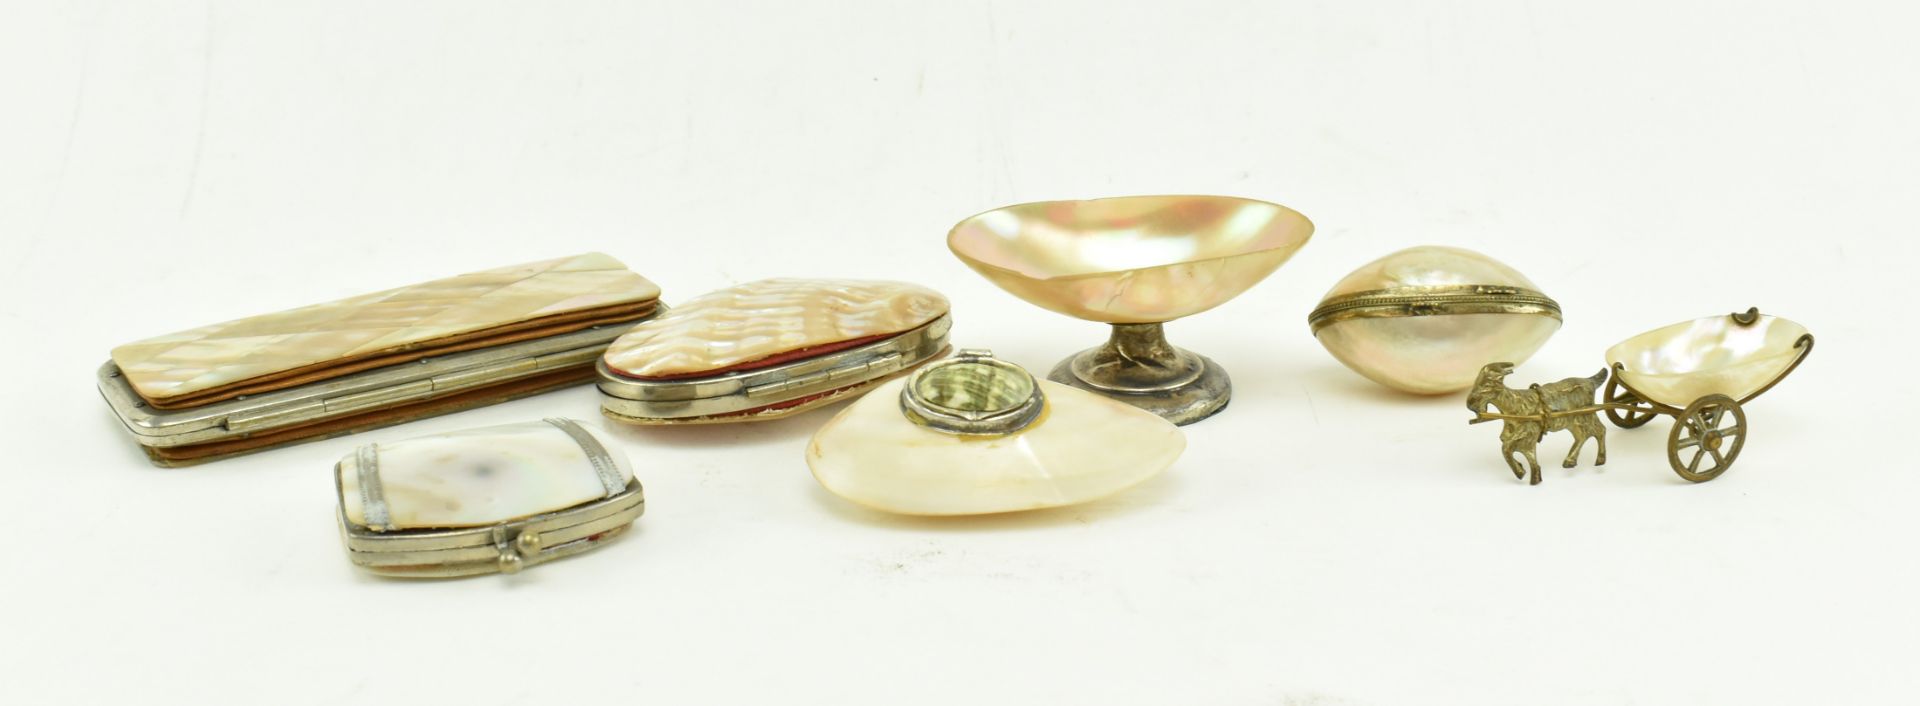 SEVEN MOTHER OF PEARL DECORATIVE TRINKET CASES